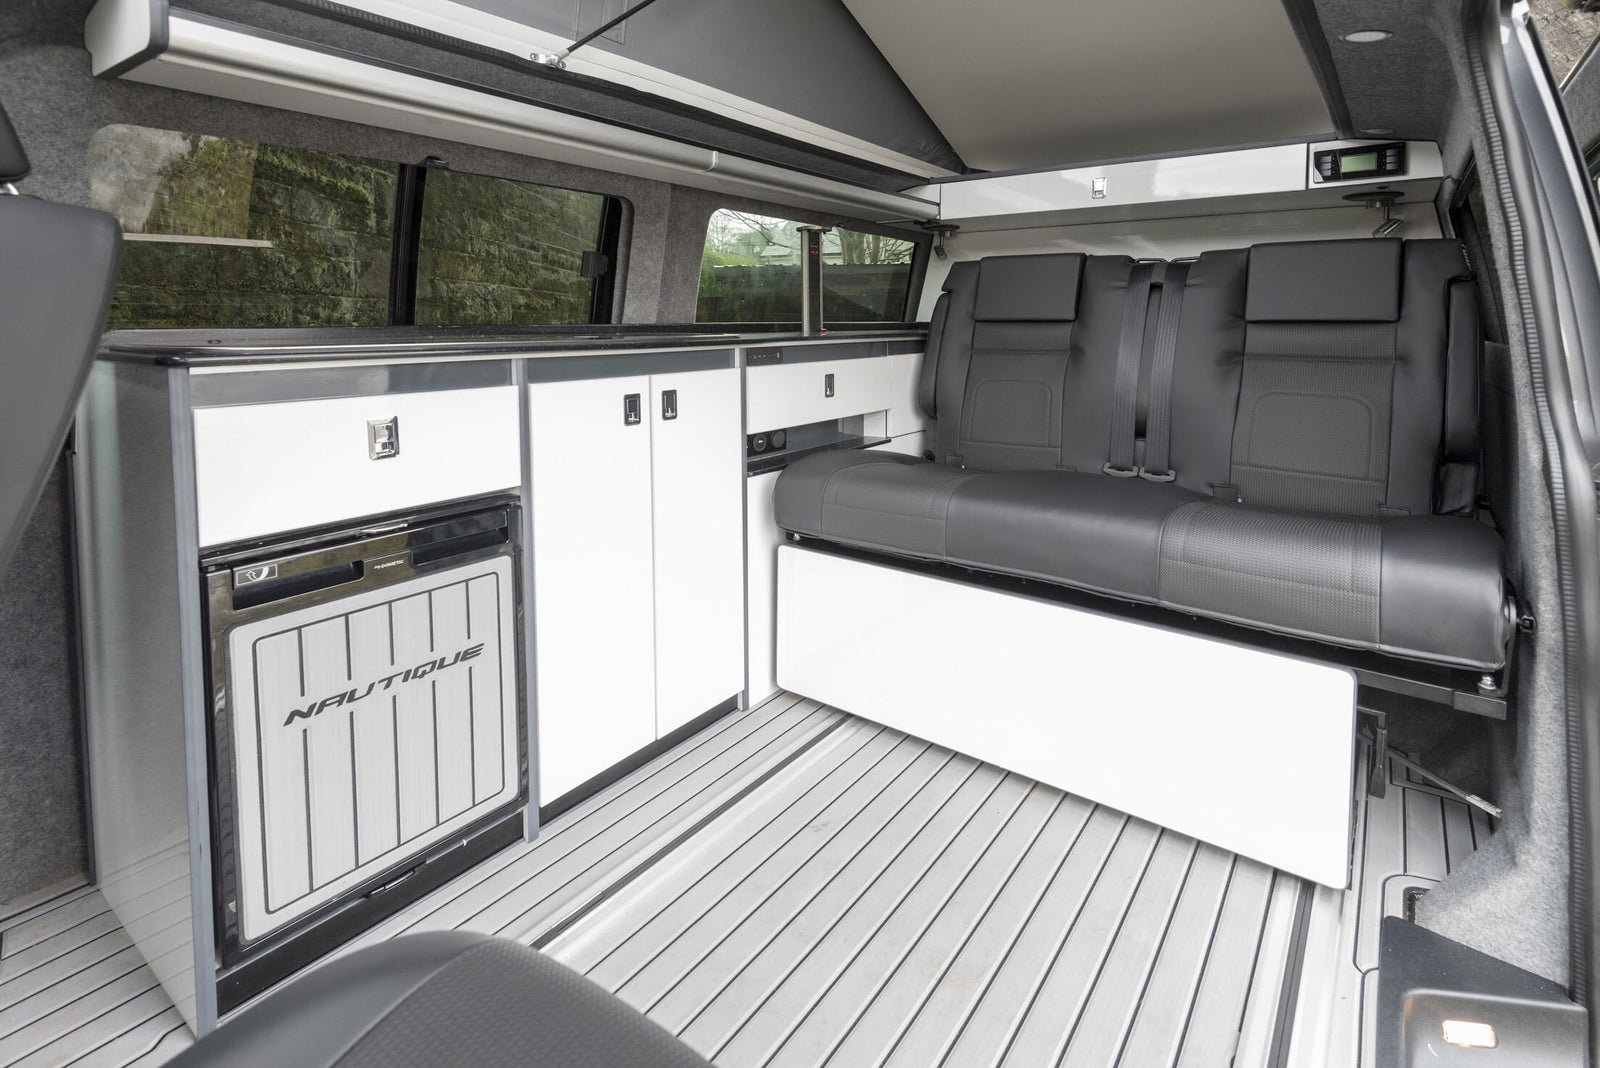 VW Campervan Conversion with RIB Bed from Wildworx